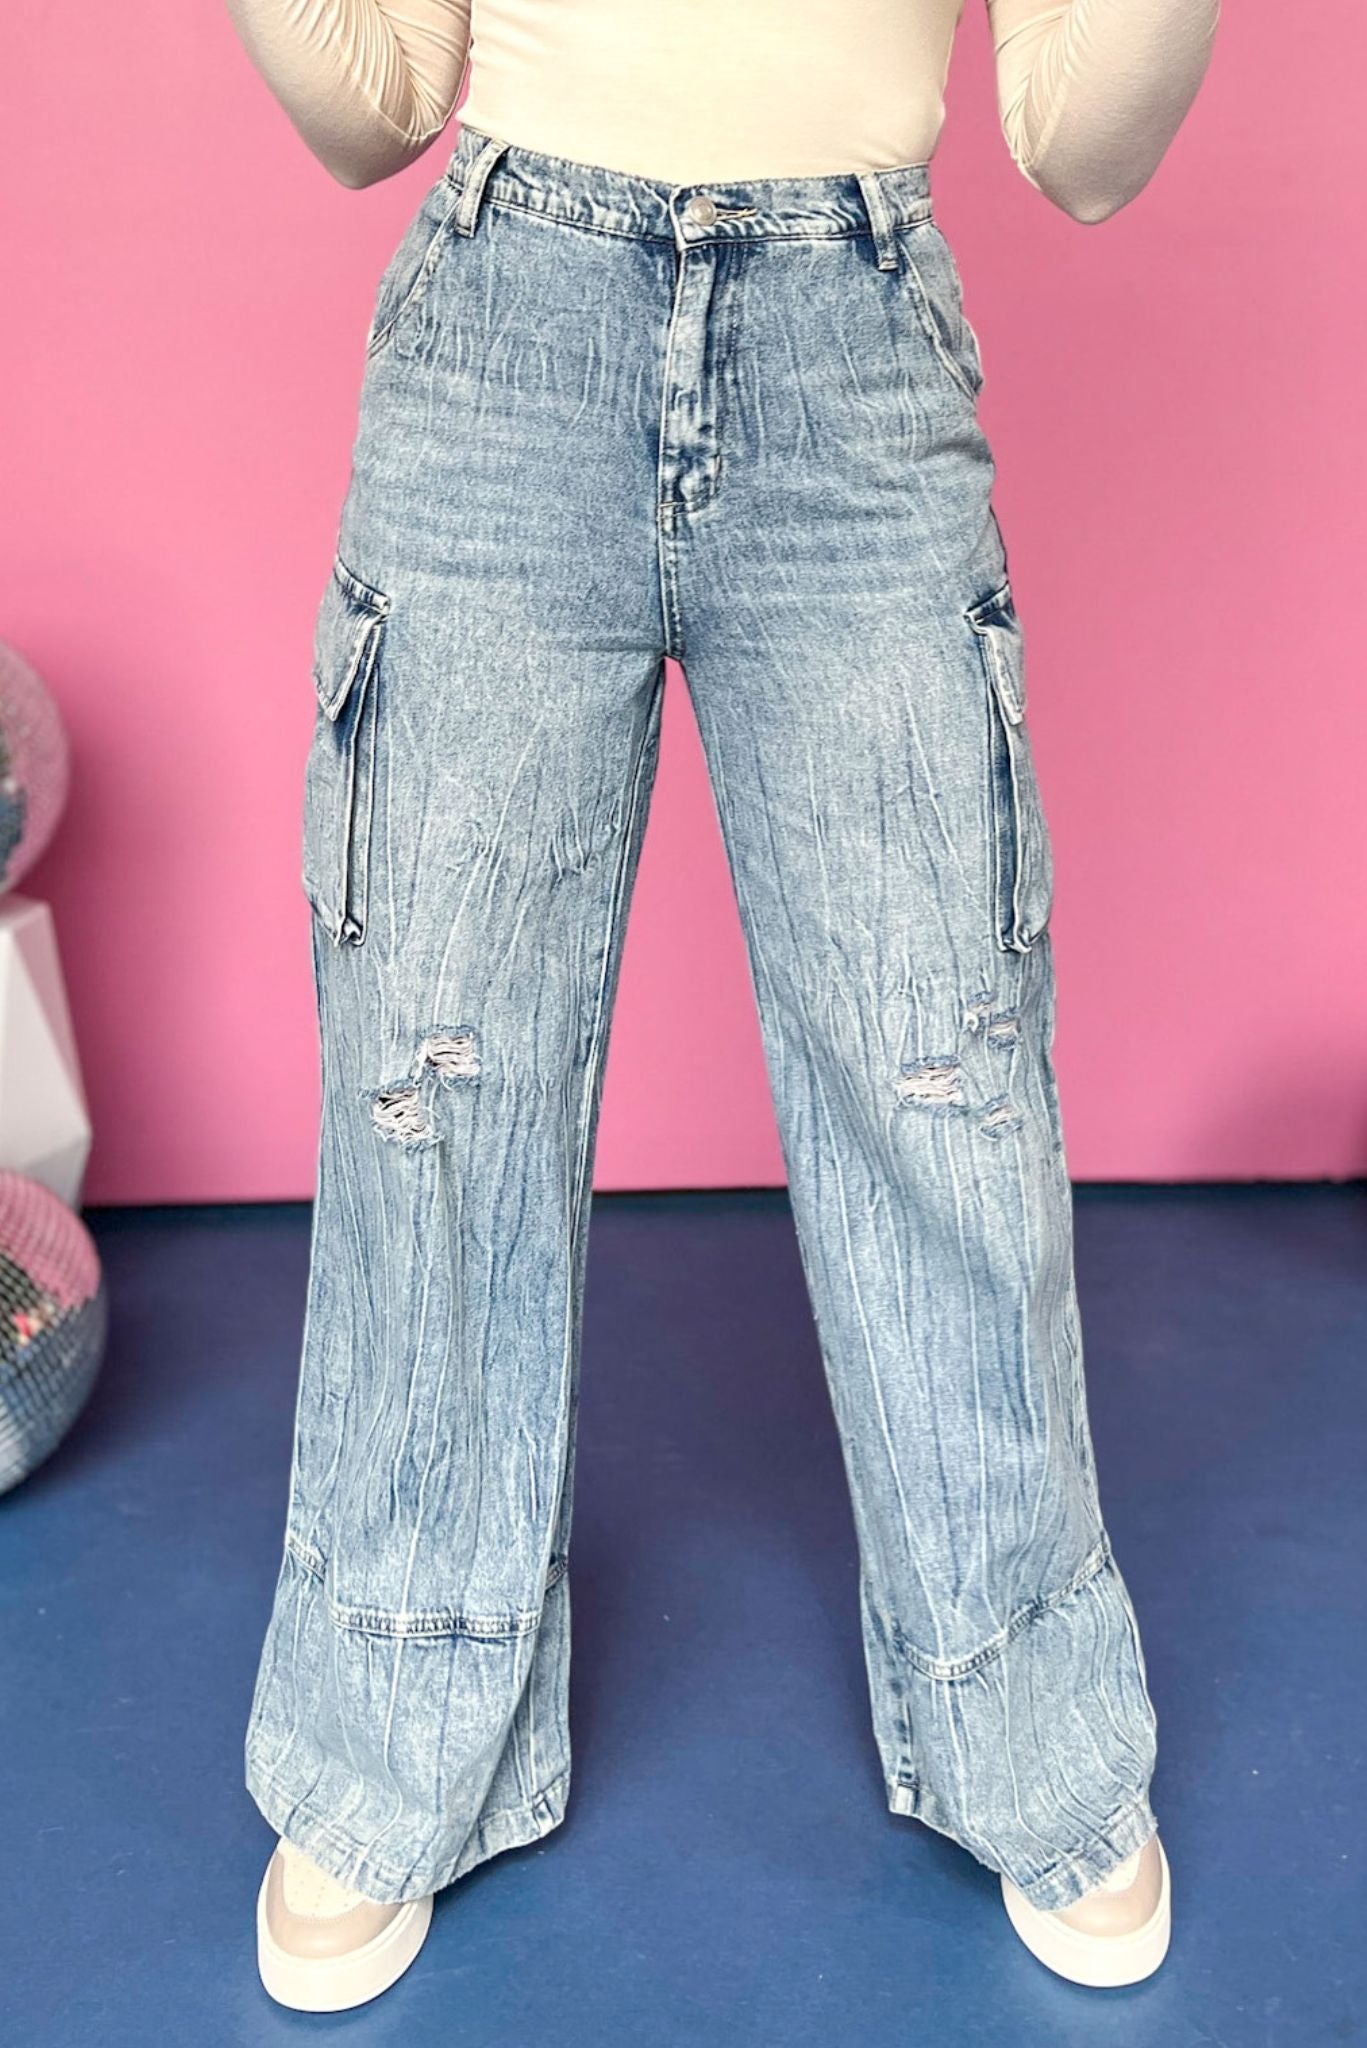 Light Wash High Rise Cargo Denim Pants, must have pants, must have style, street style, fall style, fall fashion, fall pants, elevated style, elevated pants, mom style, shop style your senses by mallory fitzsimmons